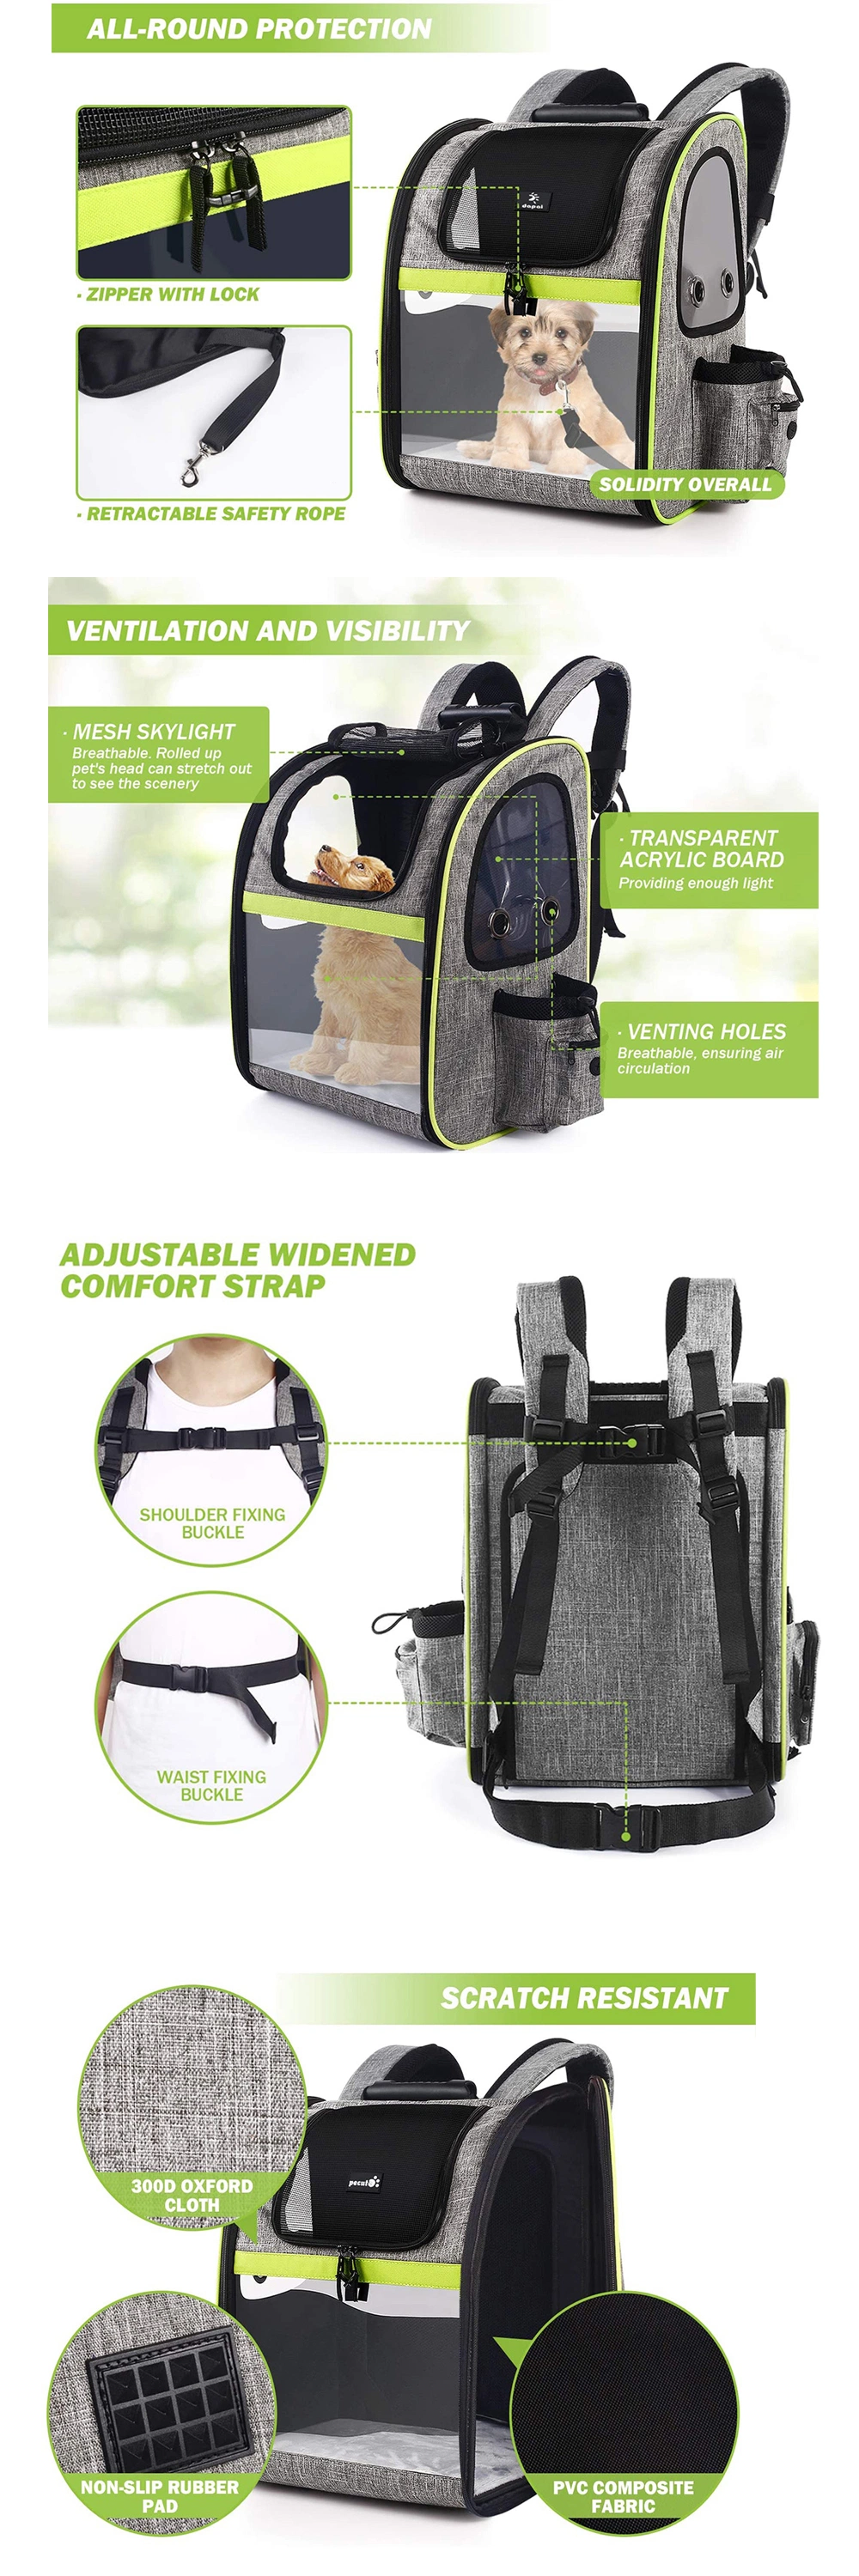 Pet Carrier Backpack, Dog Carrier Backpack, Expandable with Breathable Mesh for Small Dogs Cats Puppies, Pet Backpack Bag for Hiking Travel Camping Outdoor Hold